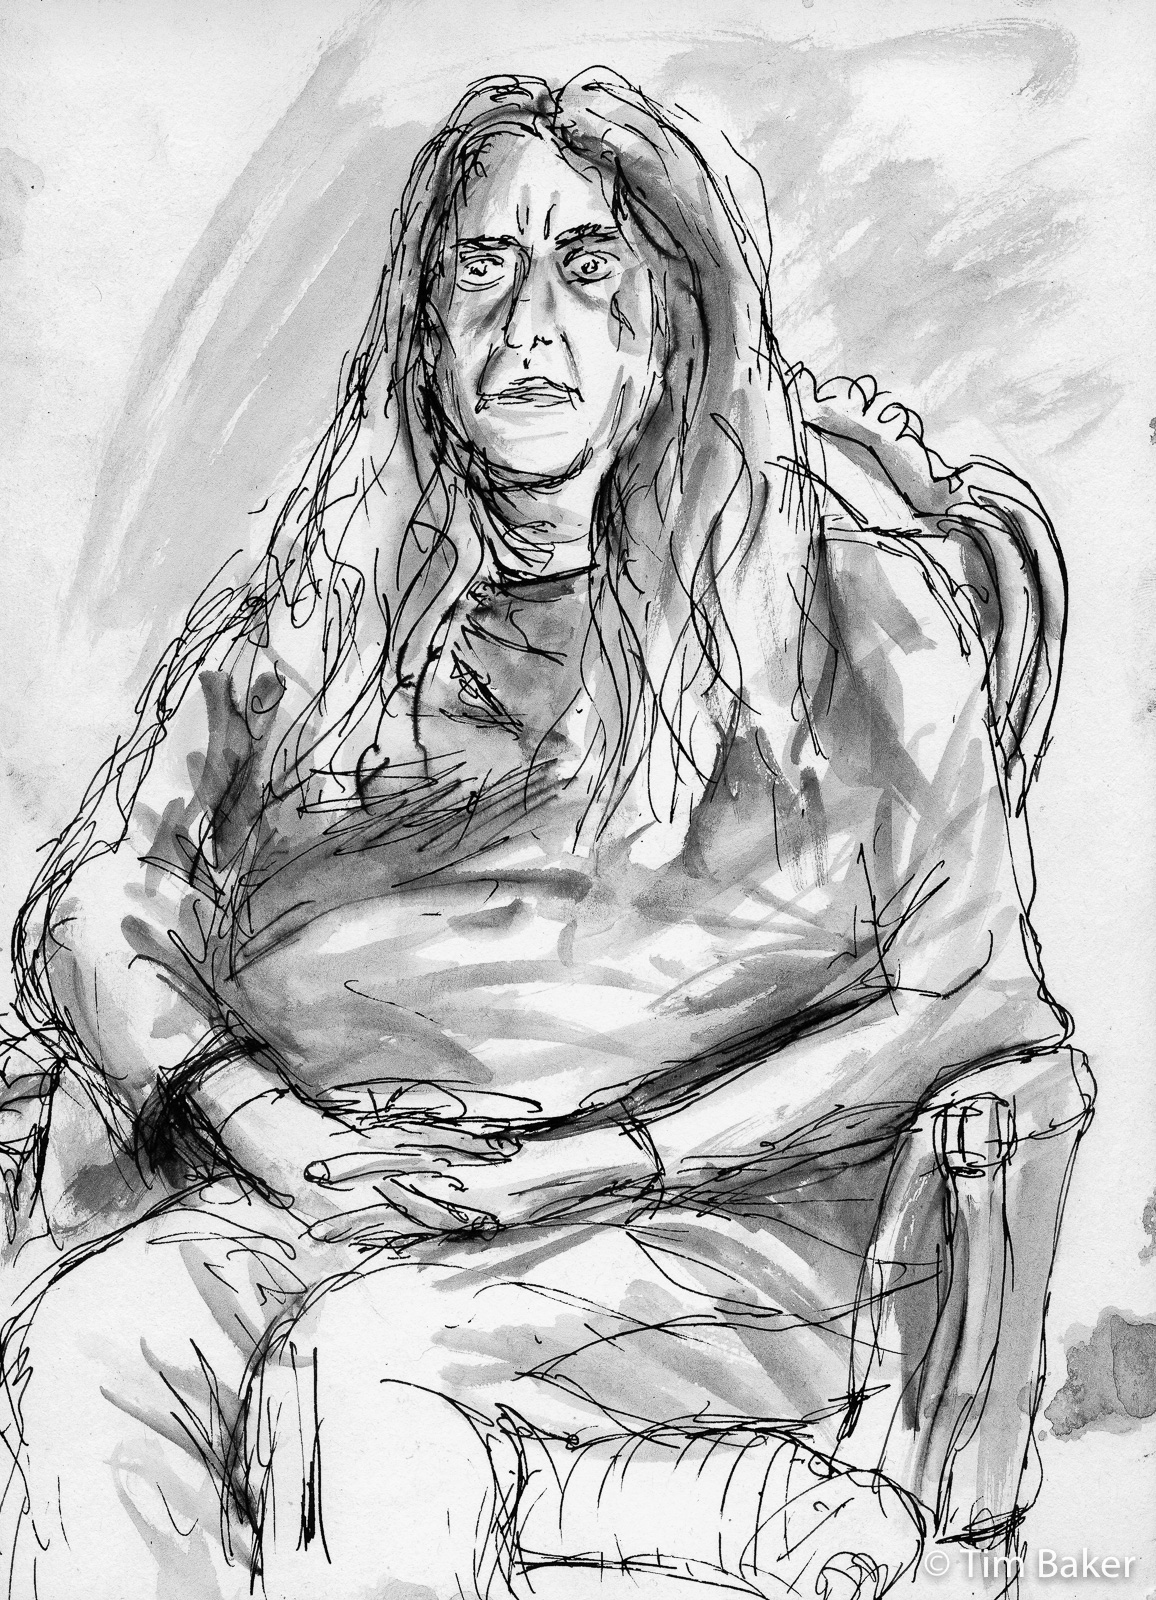 Lisa, Portraits At The Pub, Fountain Pen and wash, Flat White sketchbook.